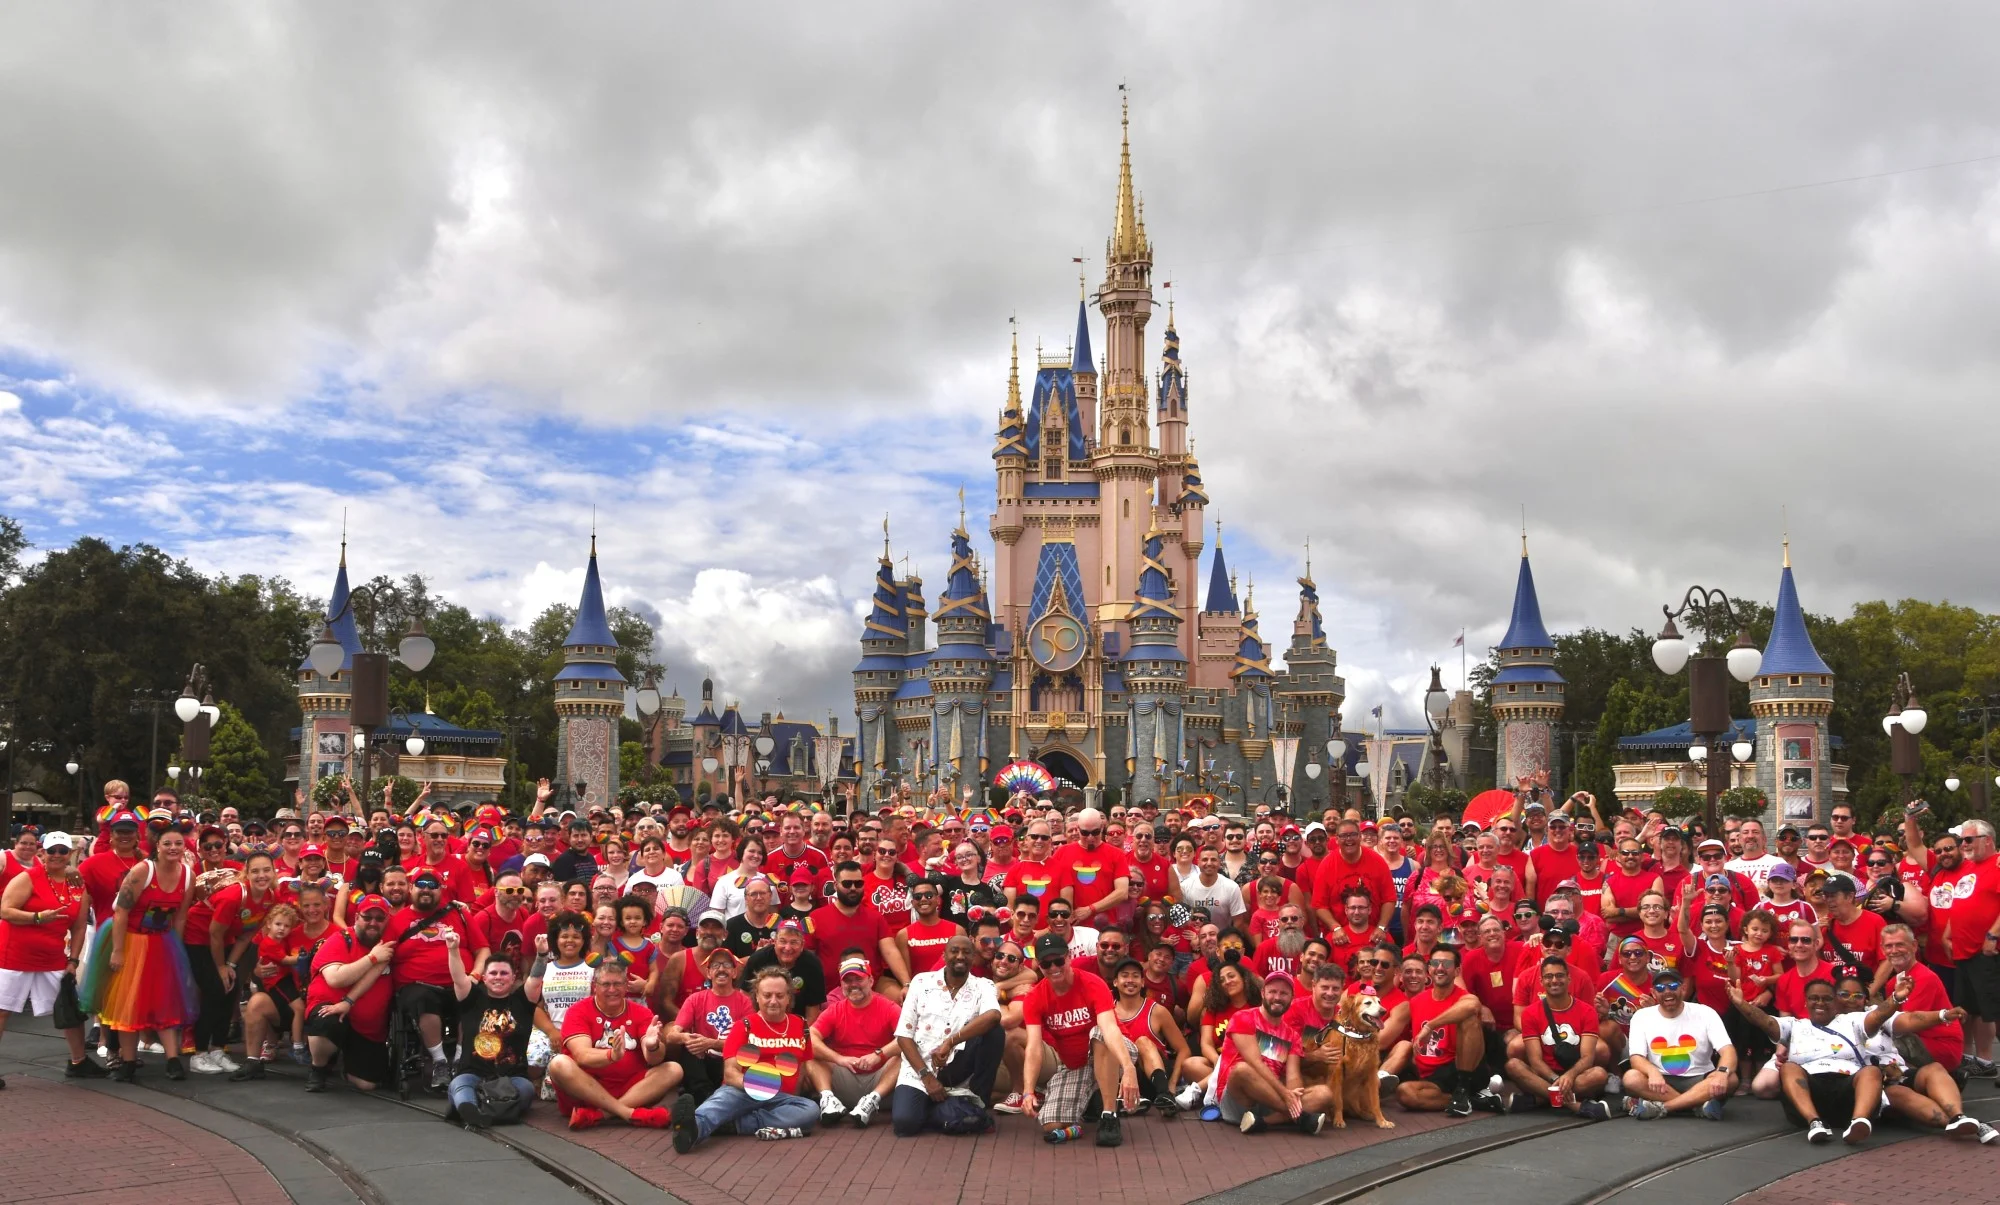 Disney Gay Days red shirt group picture in front of Cinderella Castle in Magic Kingdom Park at the Walt Disney World Resort in Orlando.